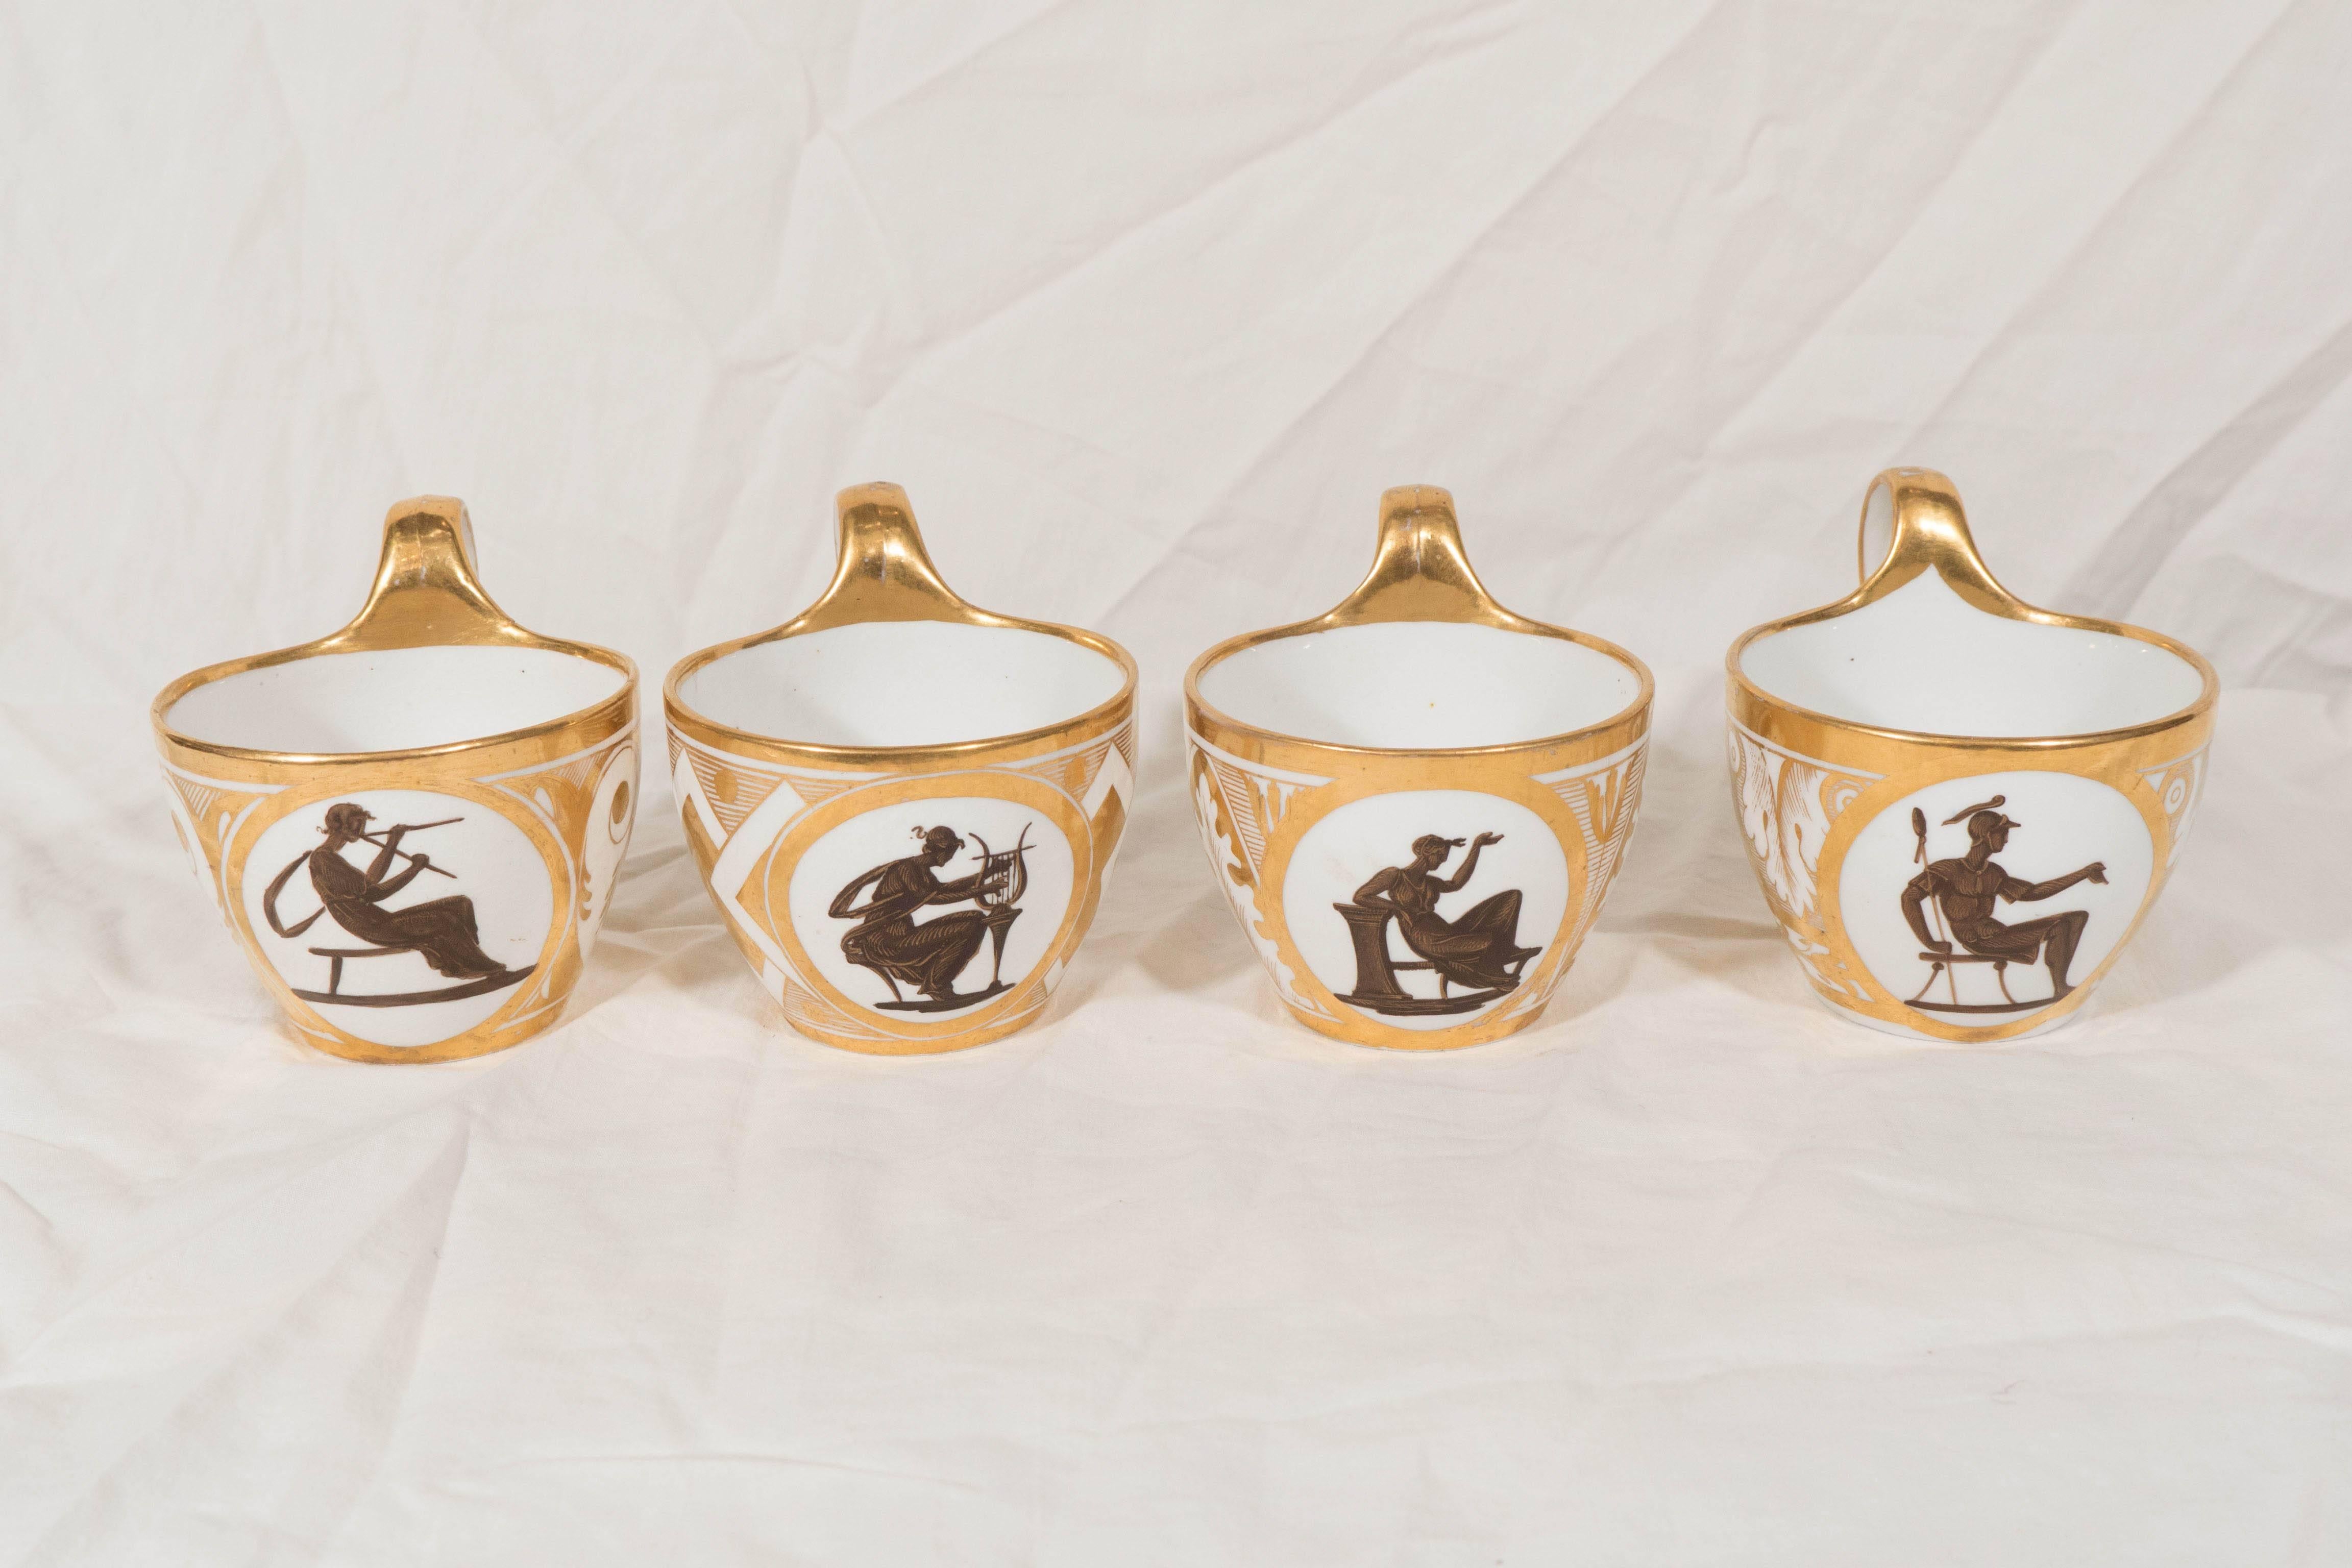  Antique Coalport Porcelain Cups and Saucers Neoclassical White and Gold  4